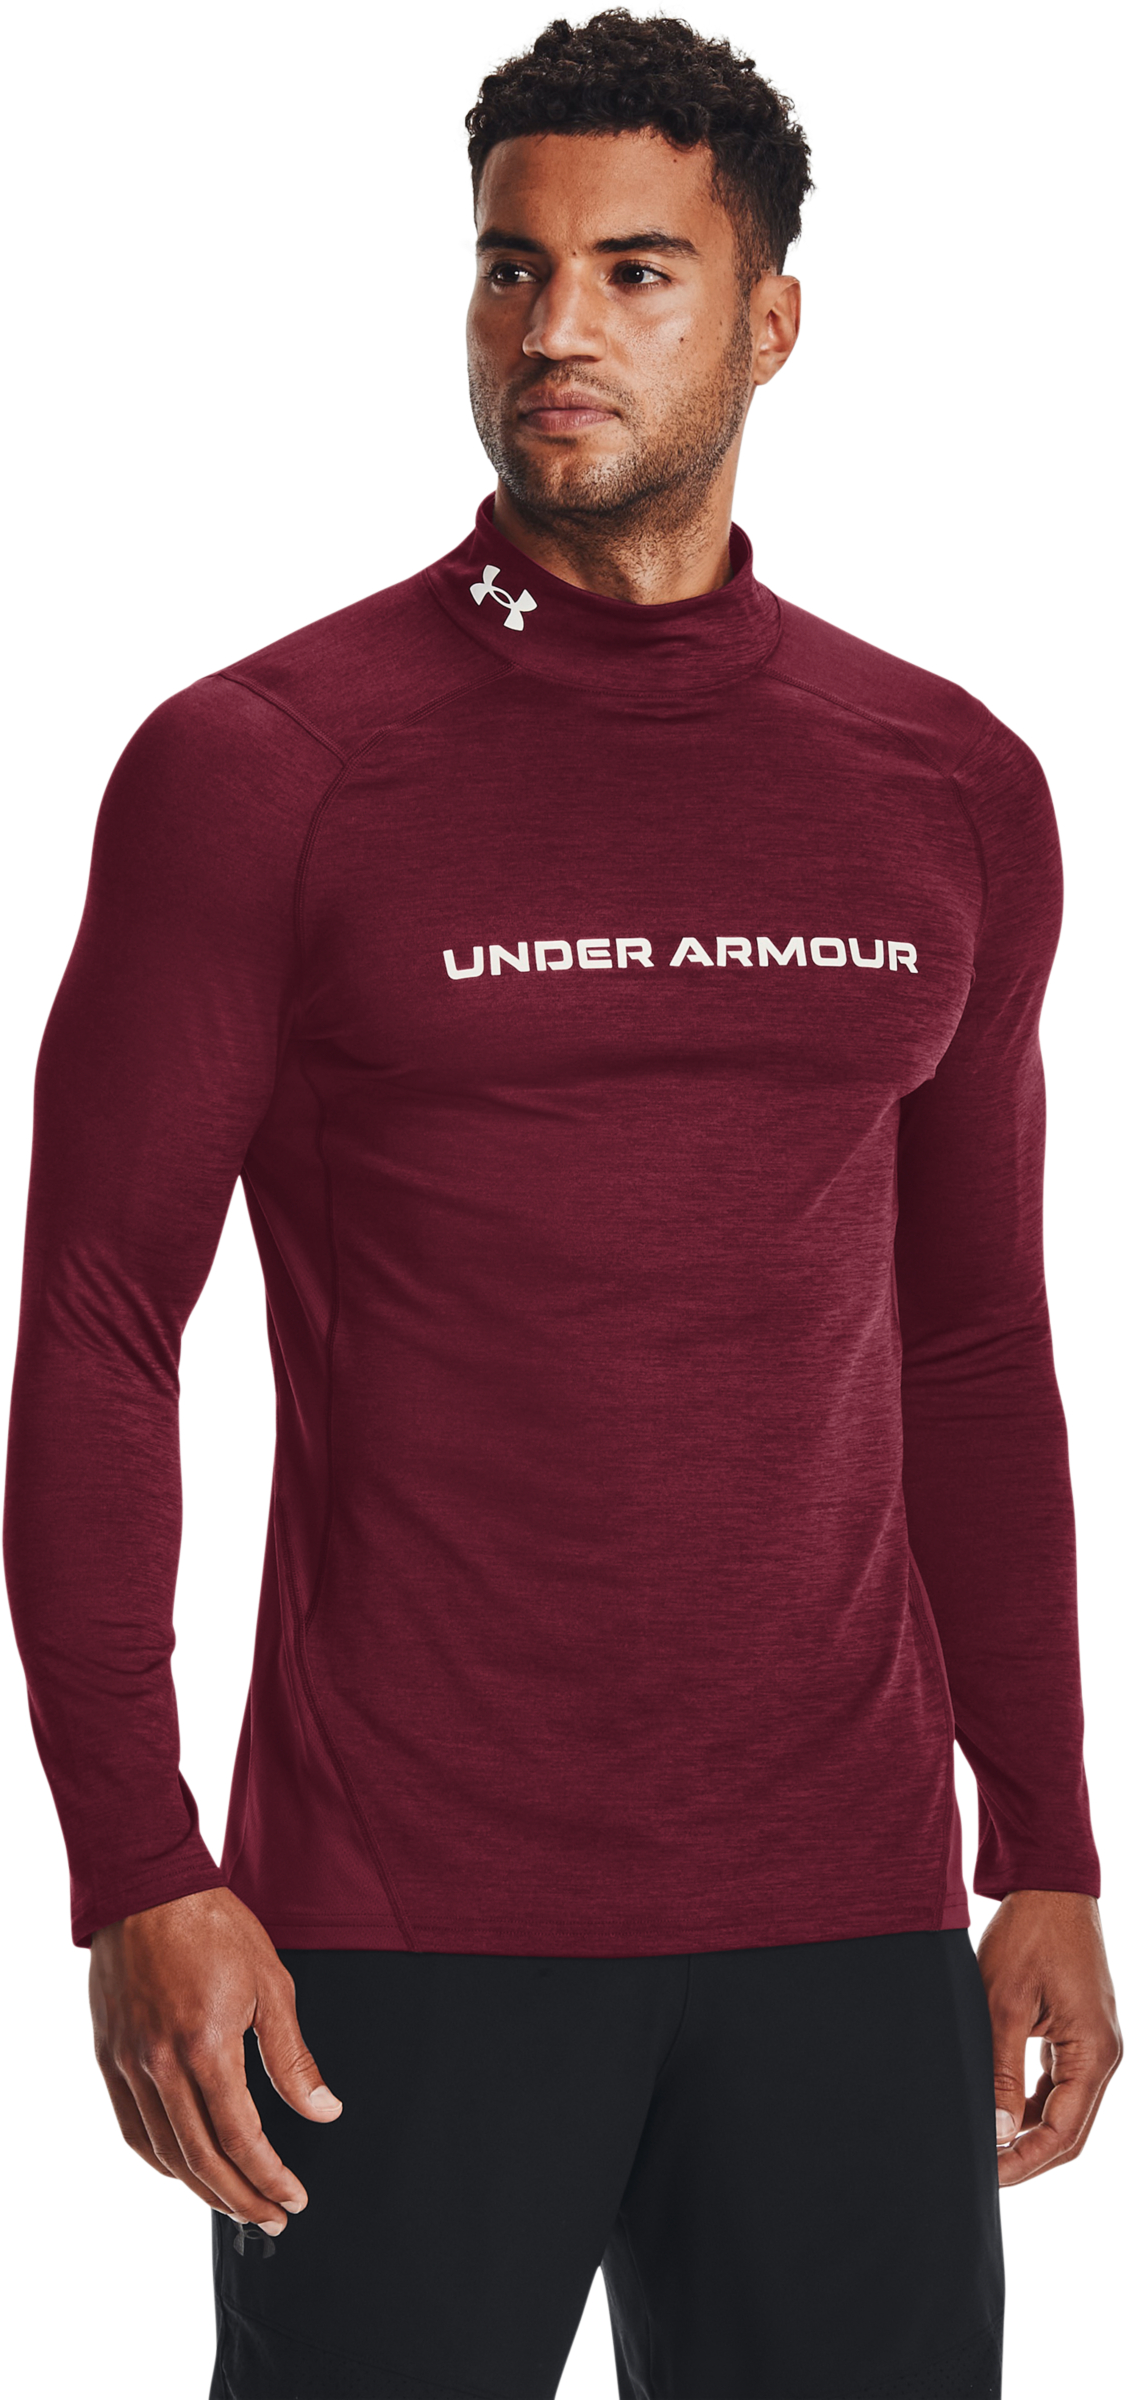 Under Armour ColdGear Fitted Twist Mock-Neck Long-Sleeve Shirt for Men